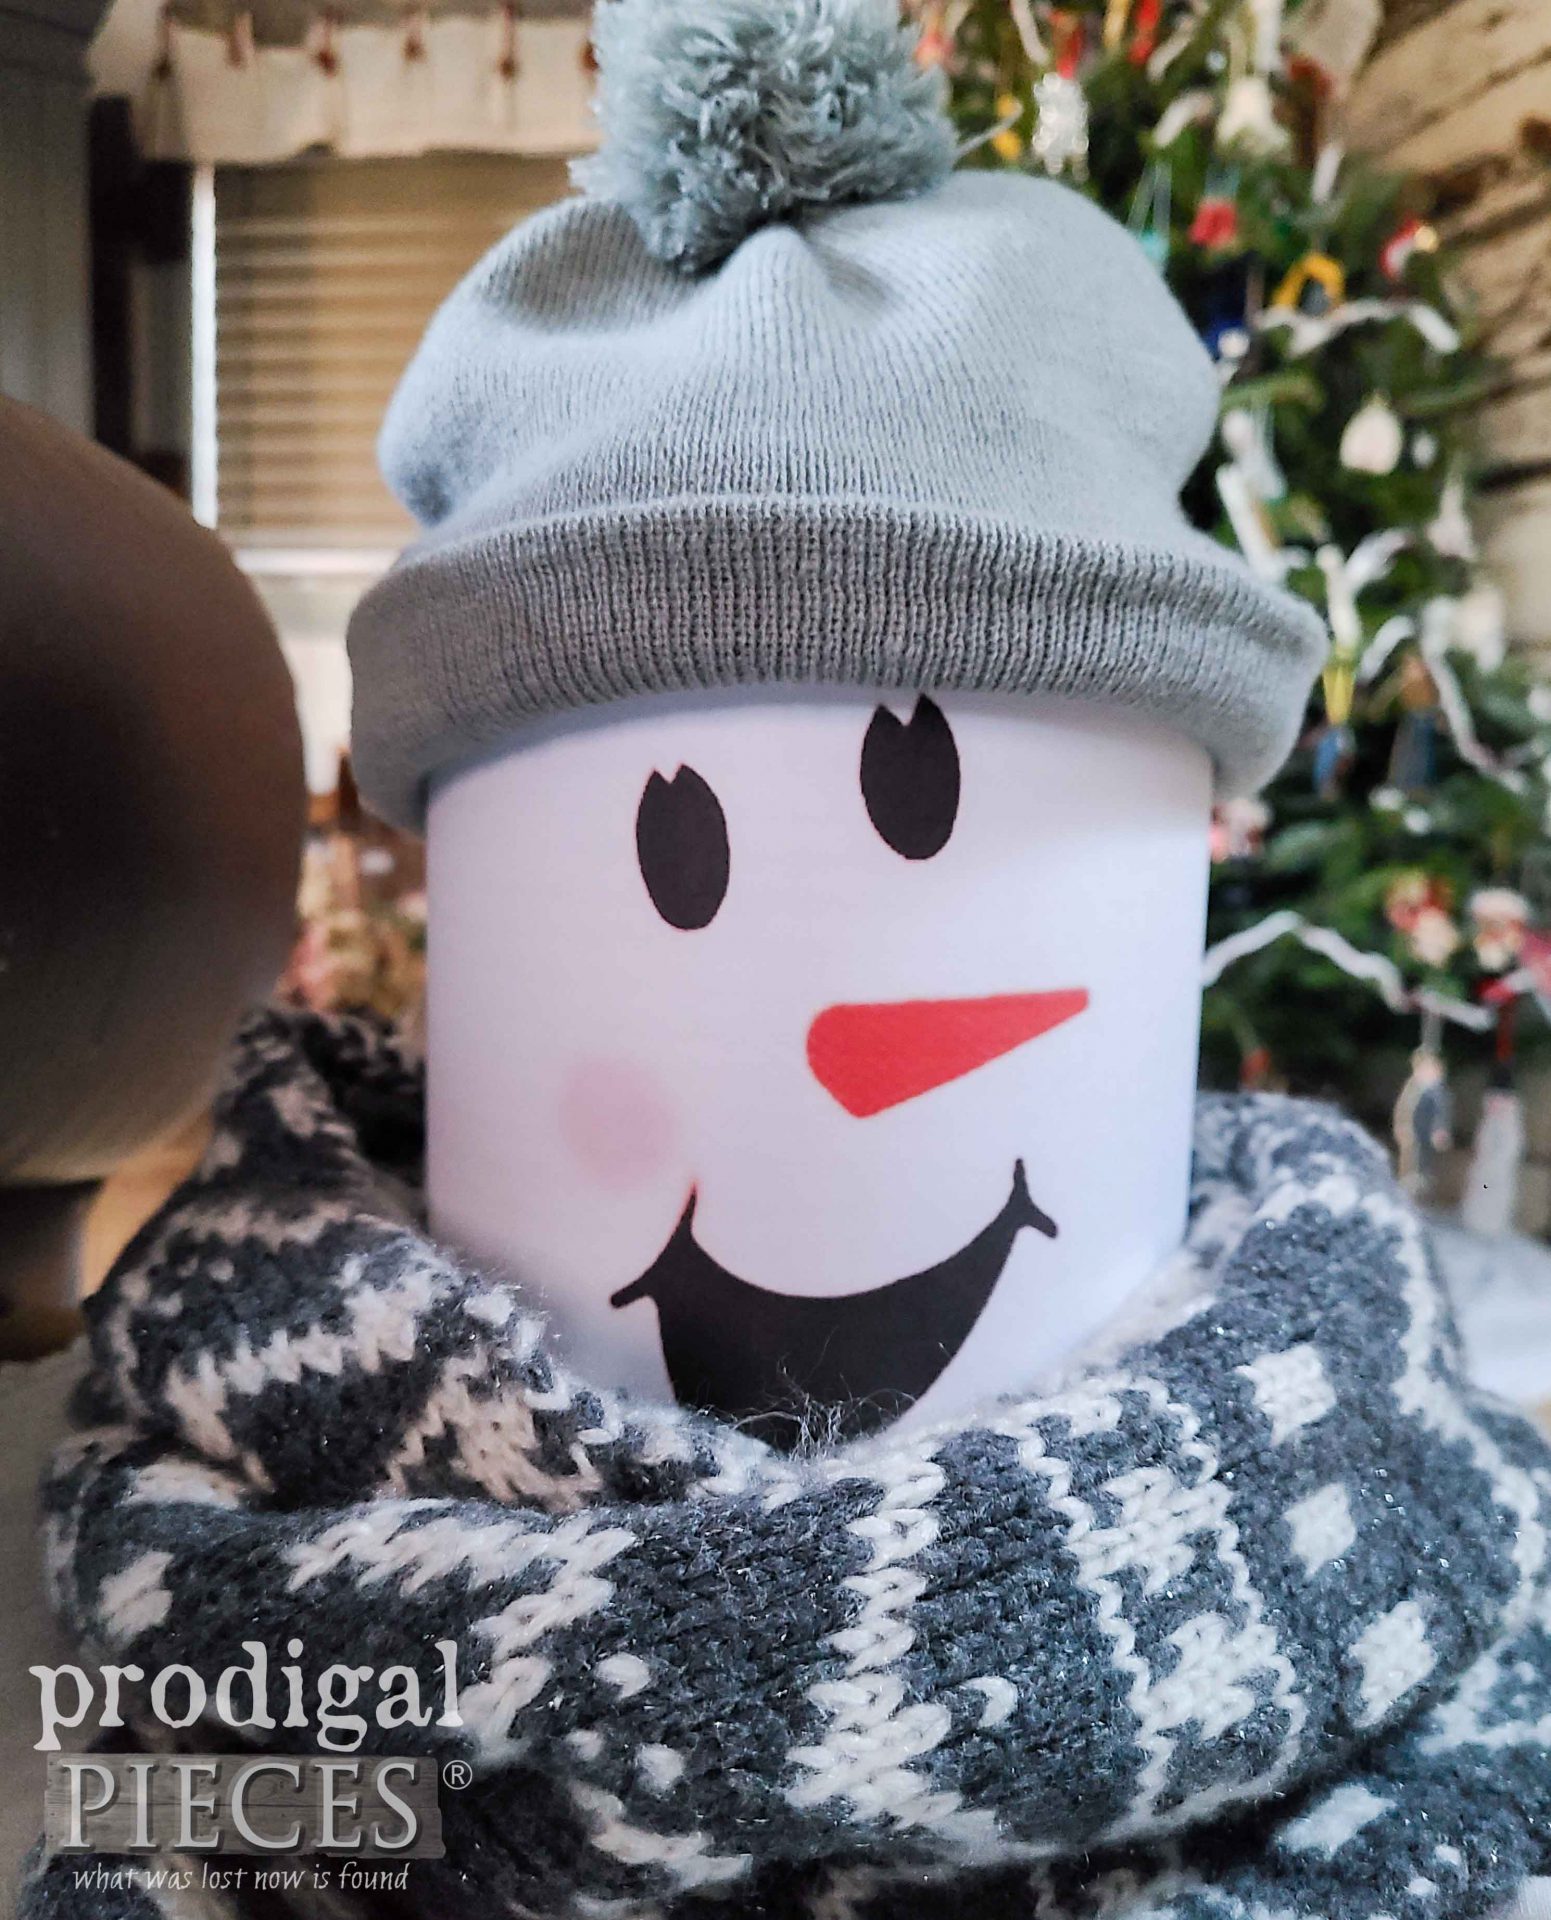 DIY Coffee Can Snowman with Upcycled Scarves by Larissa of Prodigal Pieces | prodigalpieces.com #prodigalpieces #snowman #diy